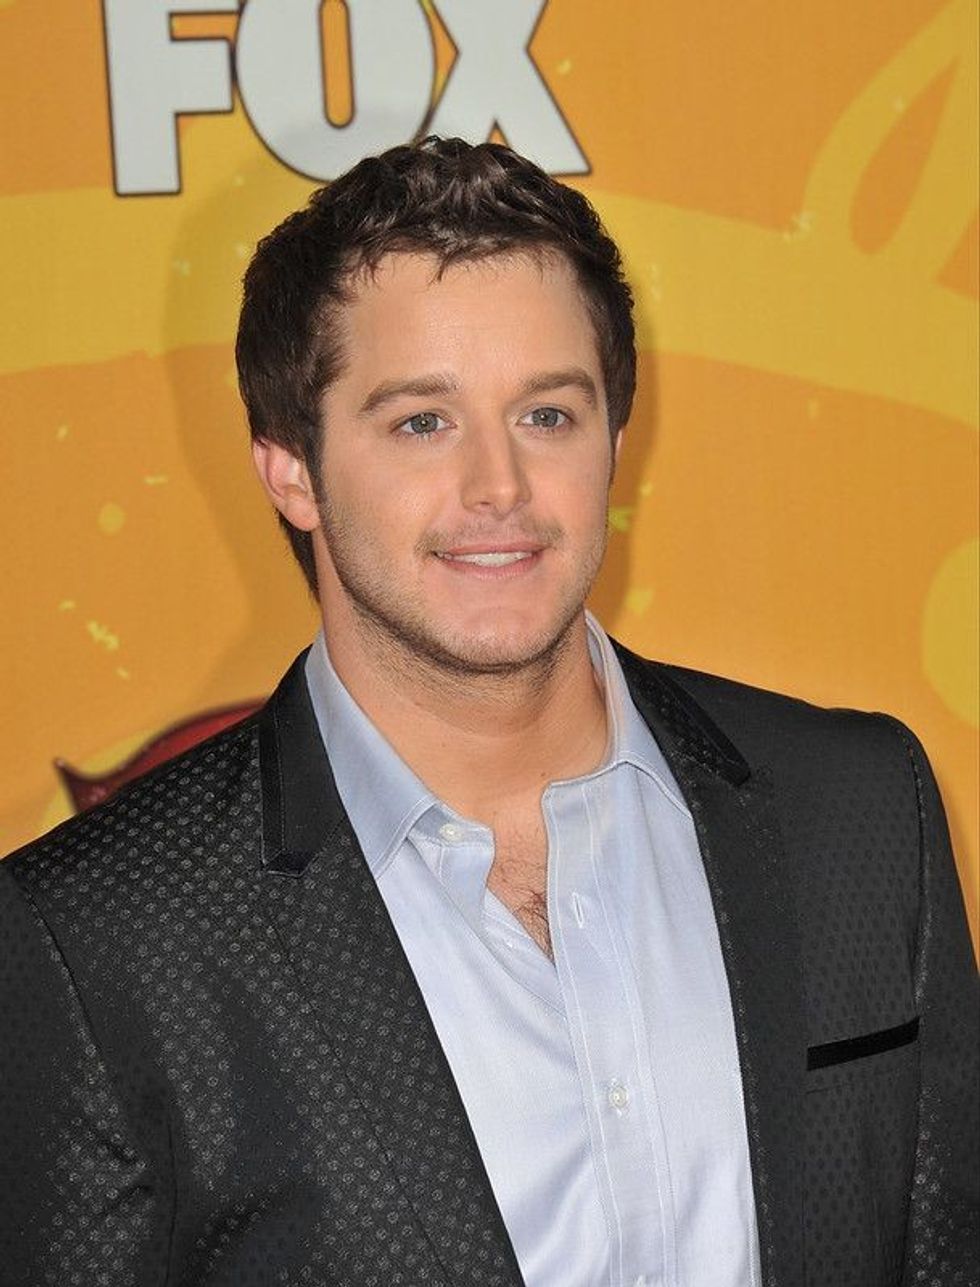 Here are some facts about Easton Corbin.